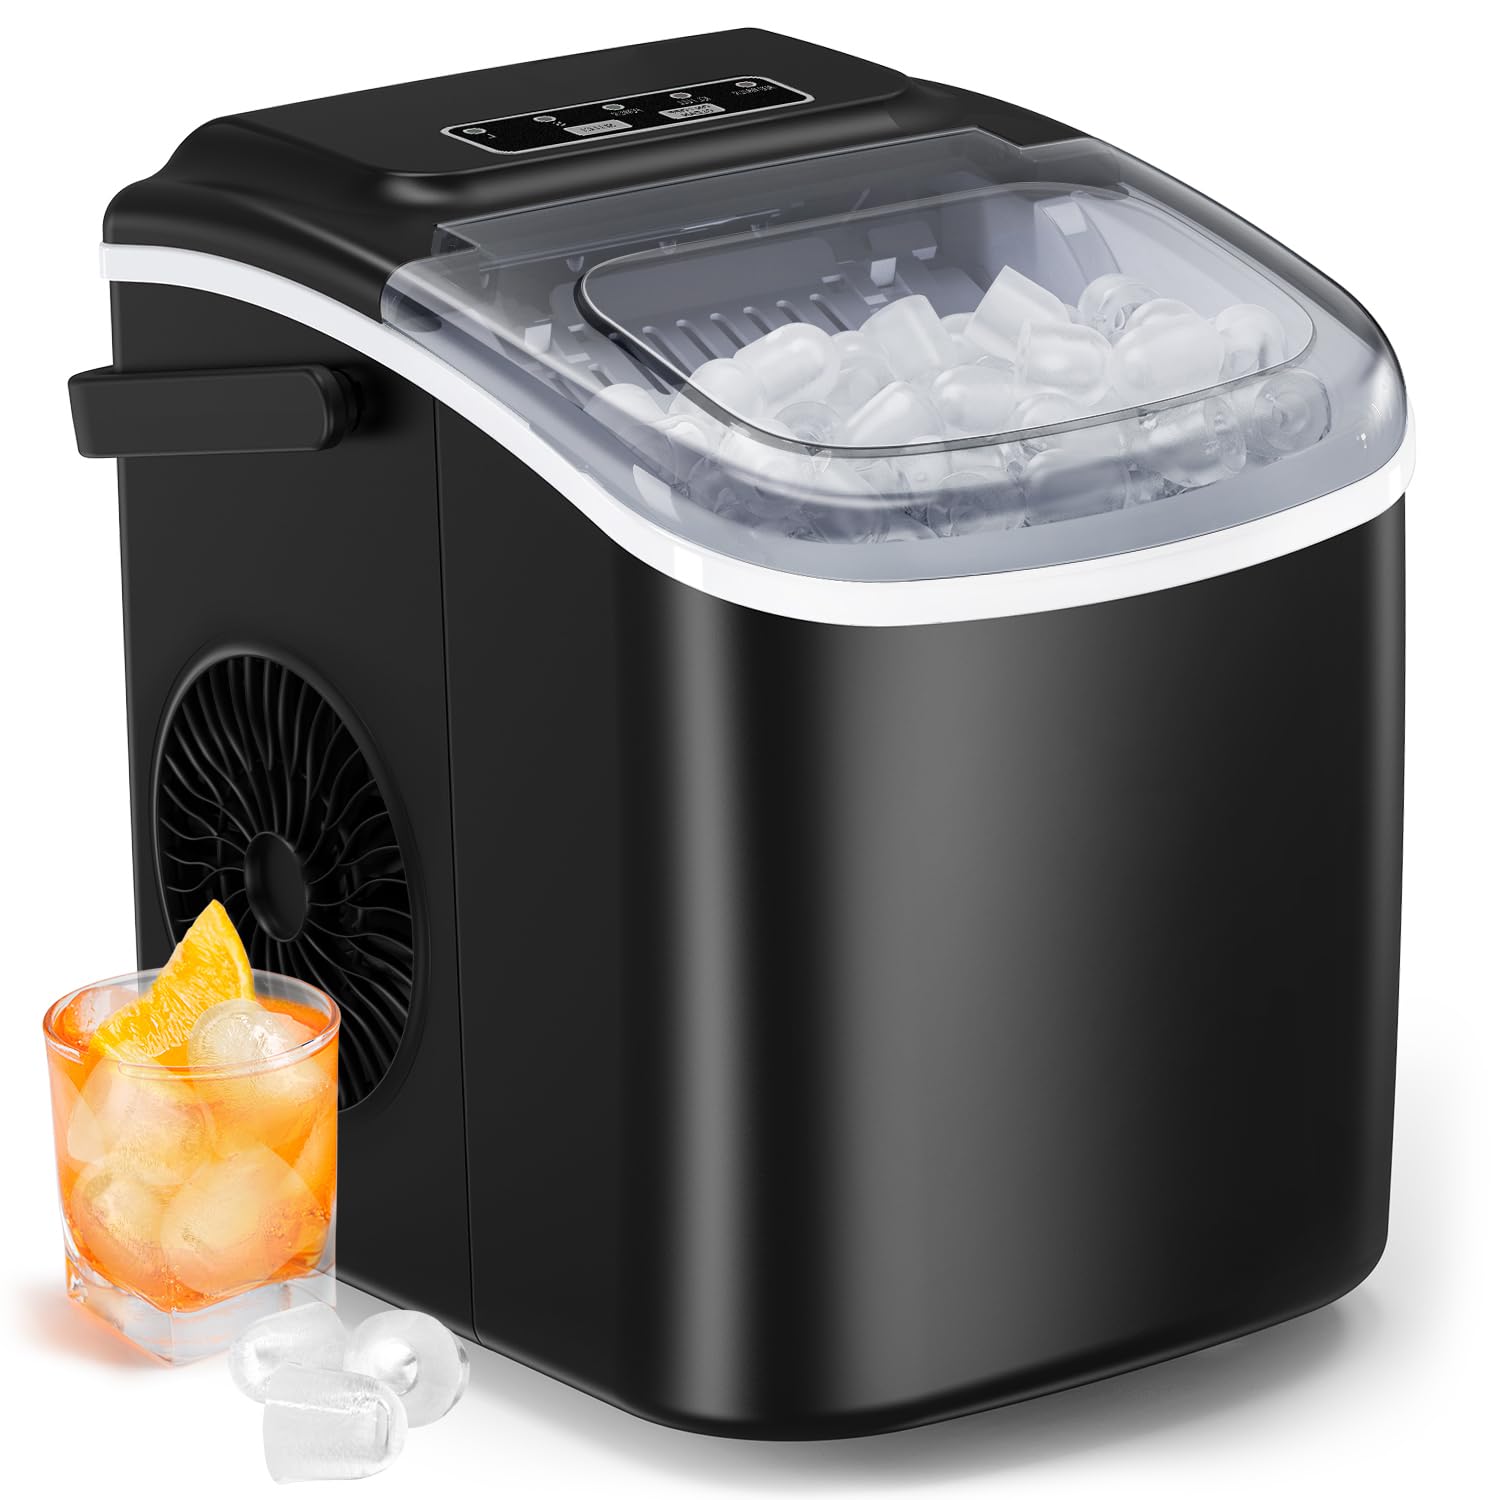 the ice maker is great!! works like it should, looks nice on countertop, not loud at all, do not notice it running unless you want to. Ice is wet when we transfer it to another container to store in freezer so you will have to somewhat break apart, but a very minor extra effort compared to filling ice trays and waiting 10 hours. this thing is fast and very convenient. I actually got it for the boss of the house as she makes smoothies which the ice chops up much easier than a big cube from a tray